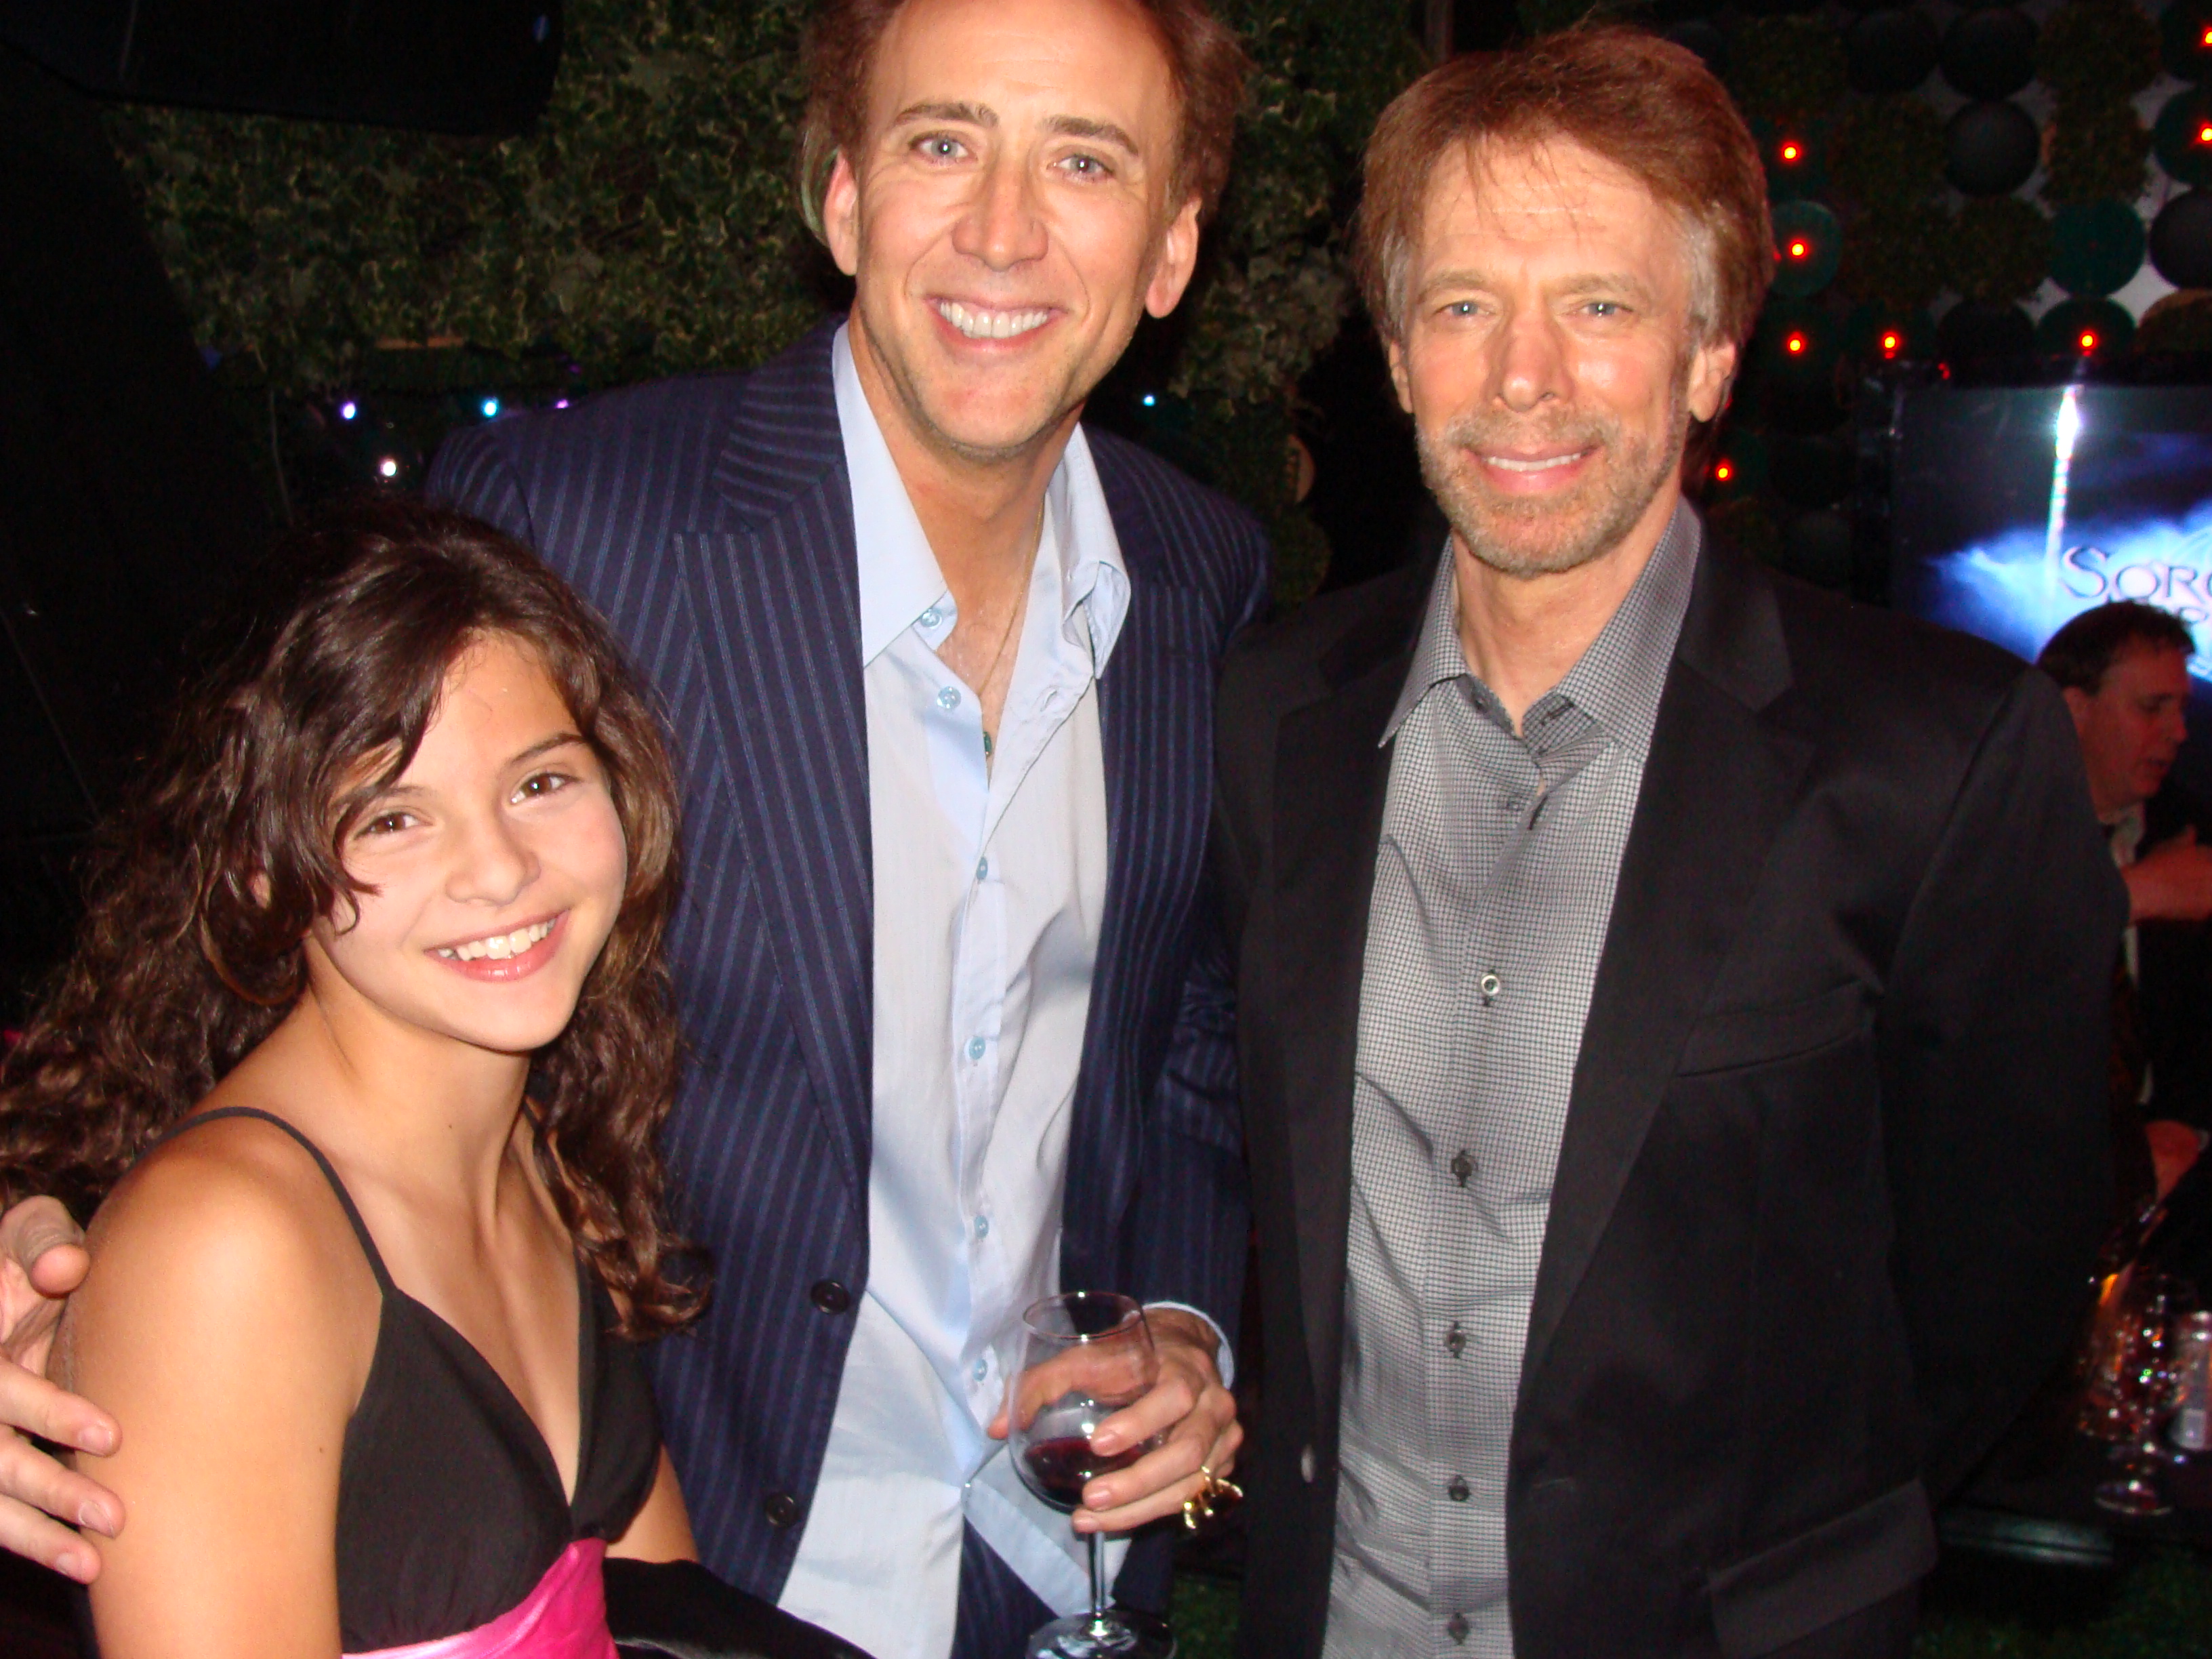 Nicole, Nicolas Cage, and Jerry Bruckheimer at Sorcerer's Apprentice wrap party